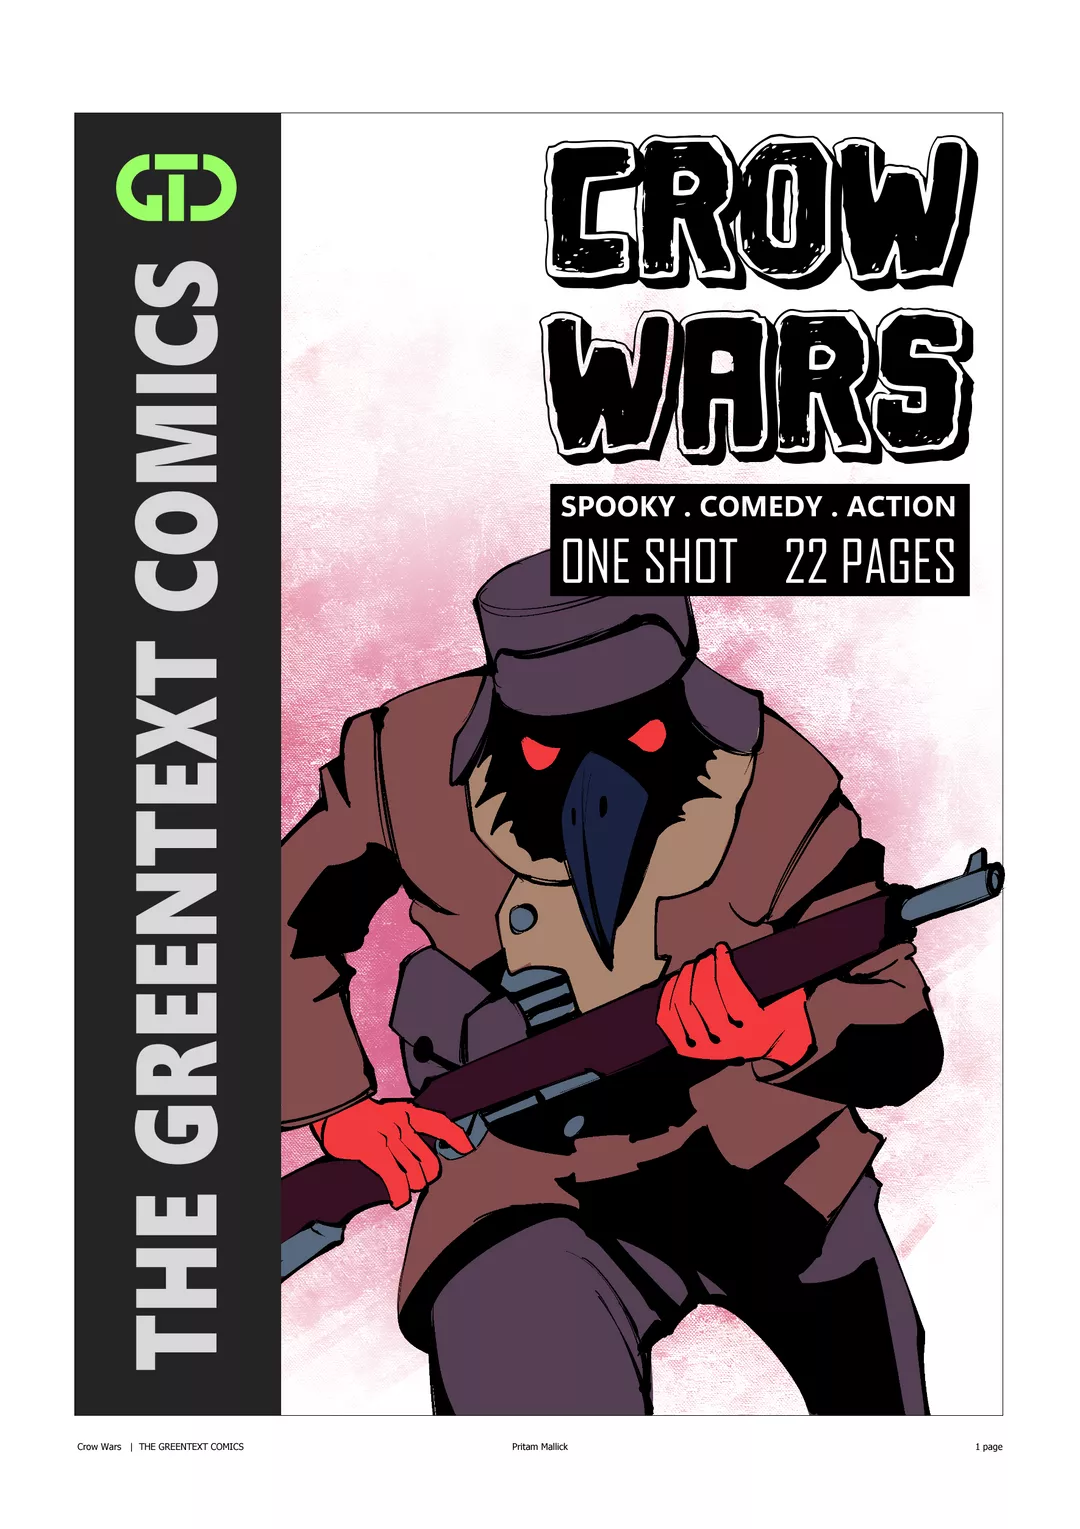 Crow Wars (Cover Release)